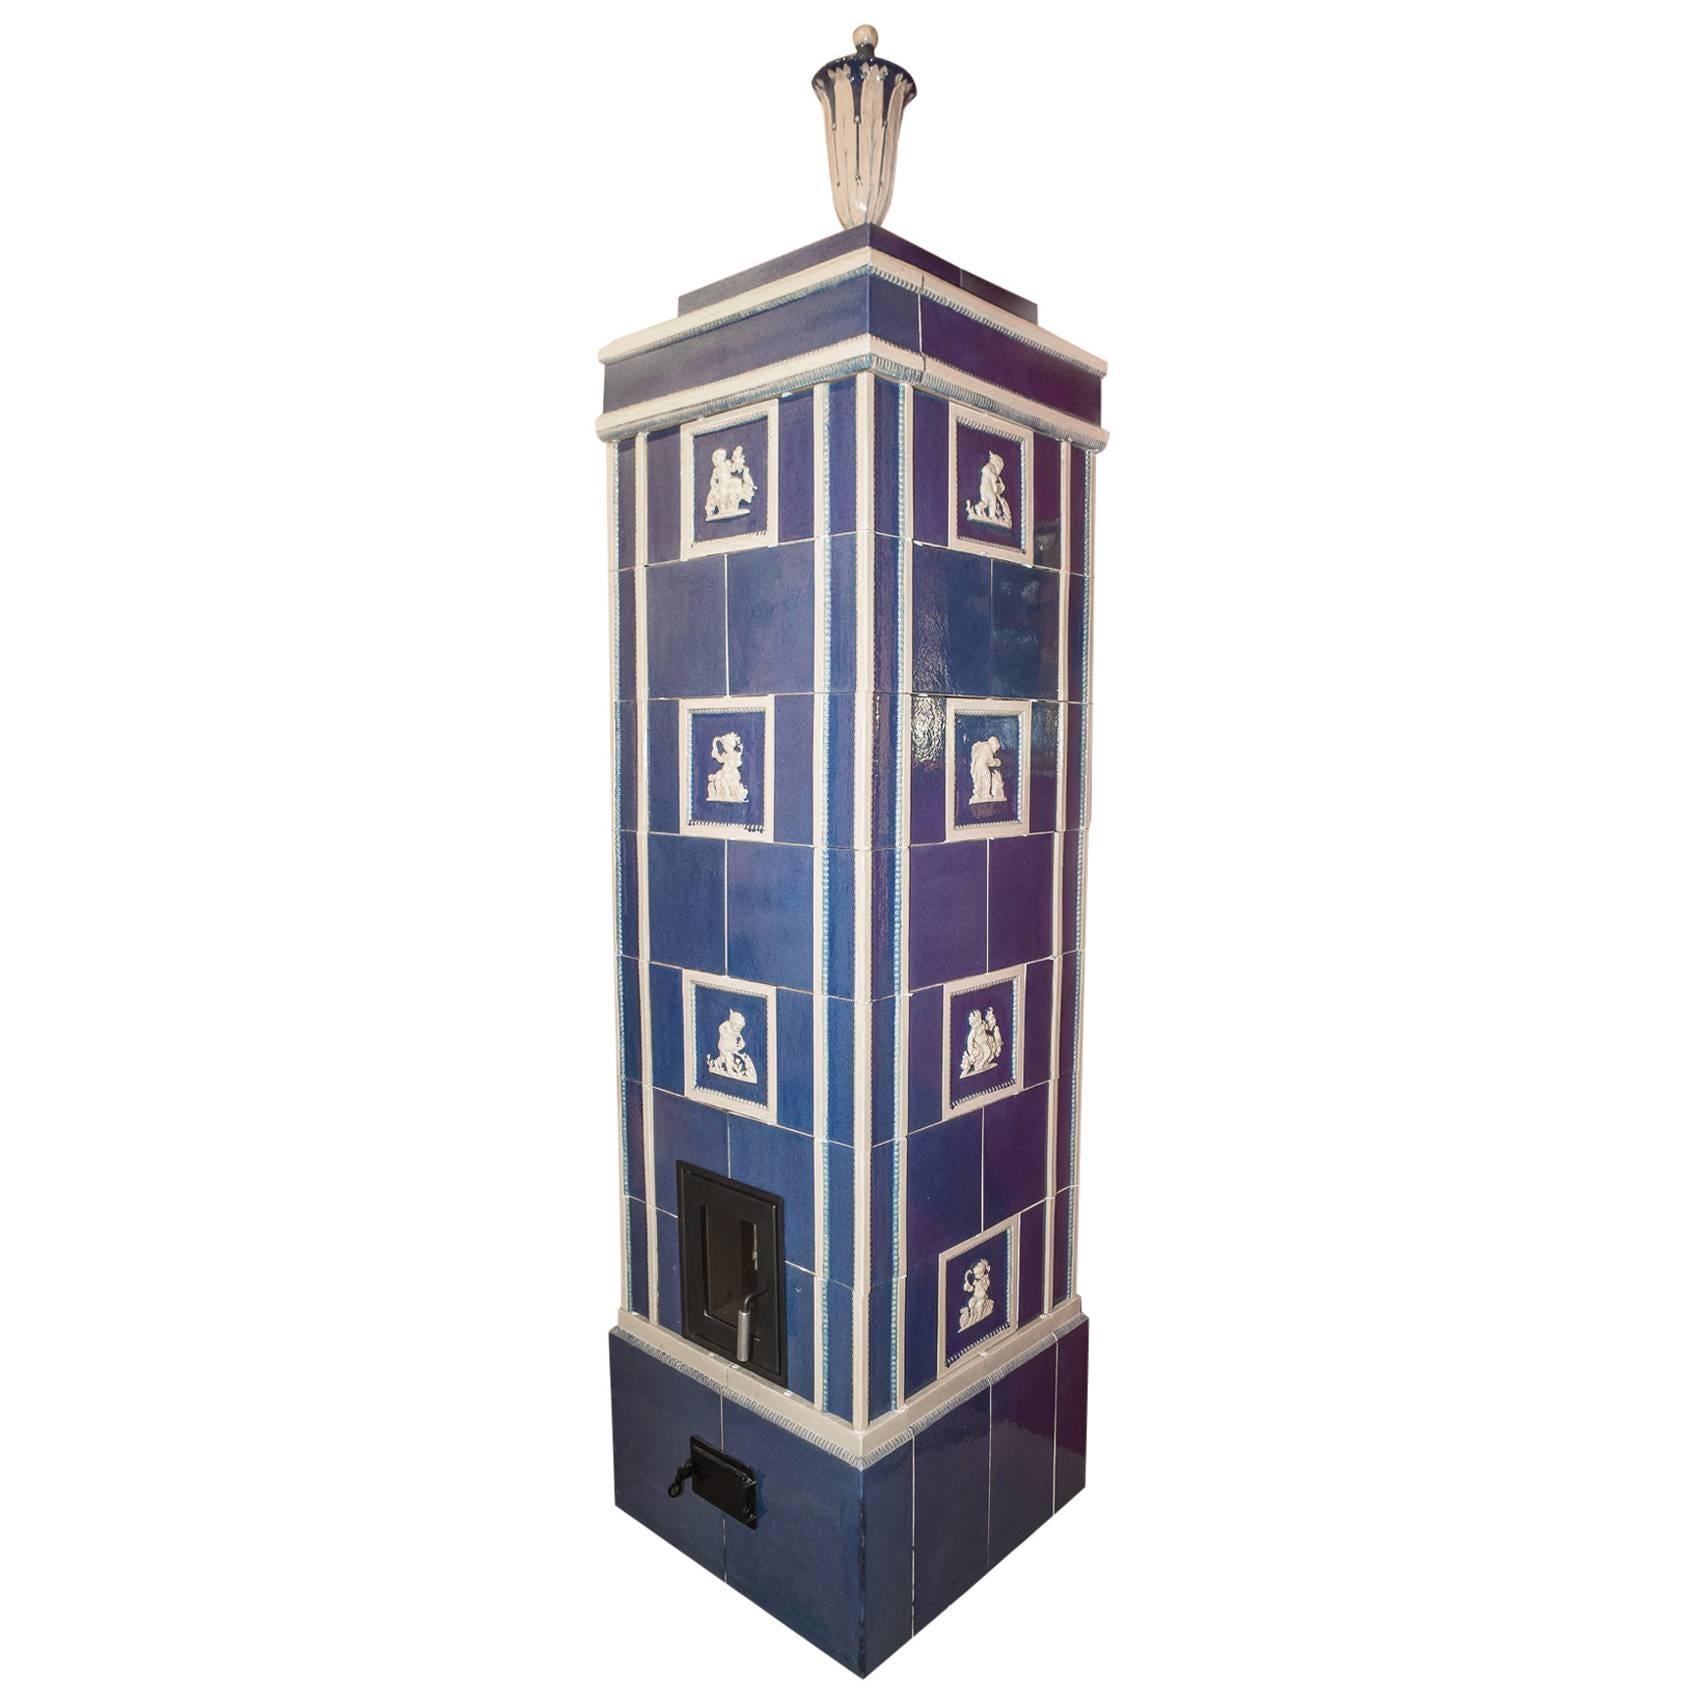 Tile Stove in Prussian Blue and White by Michael Powolny, Austria 1910. For Sale